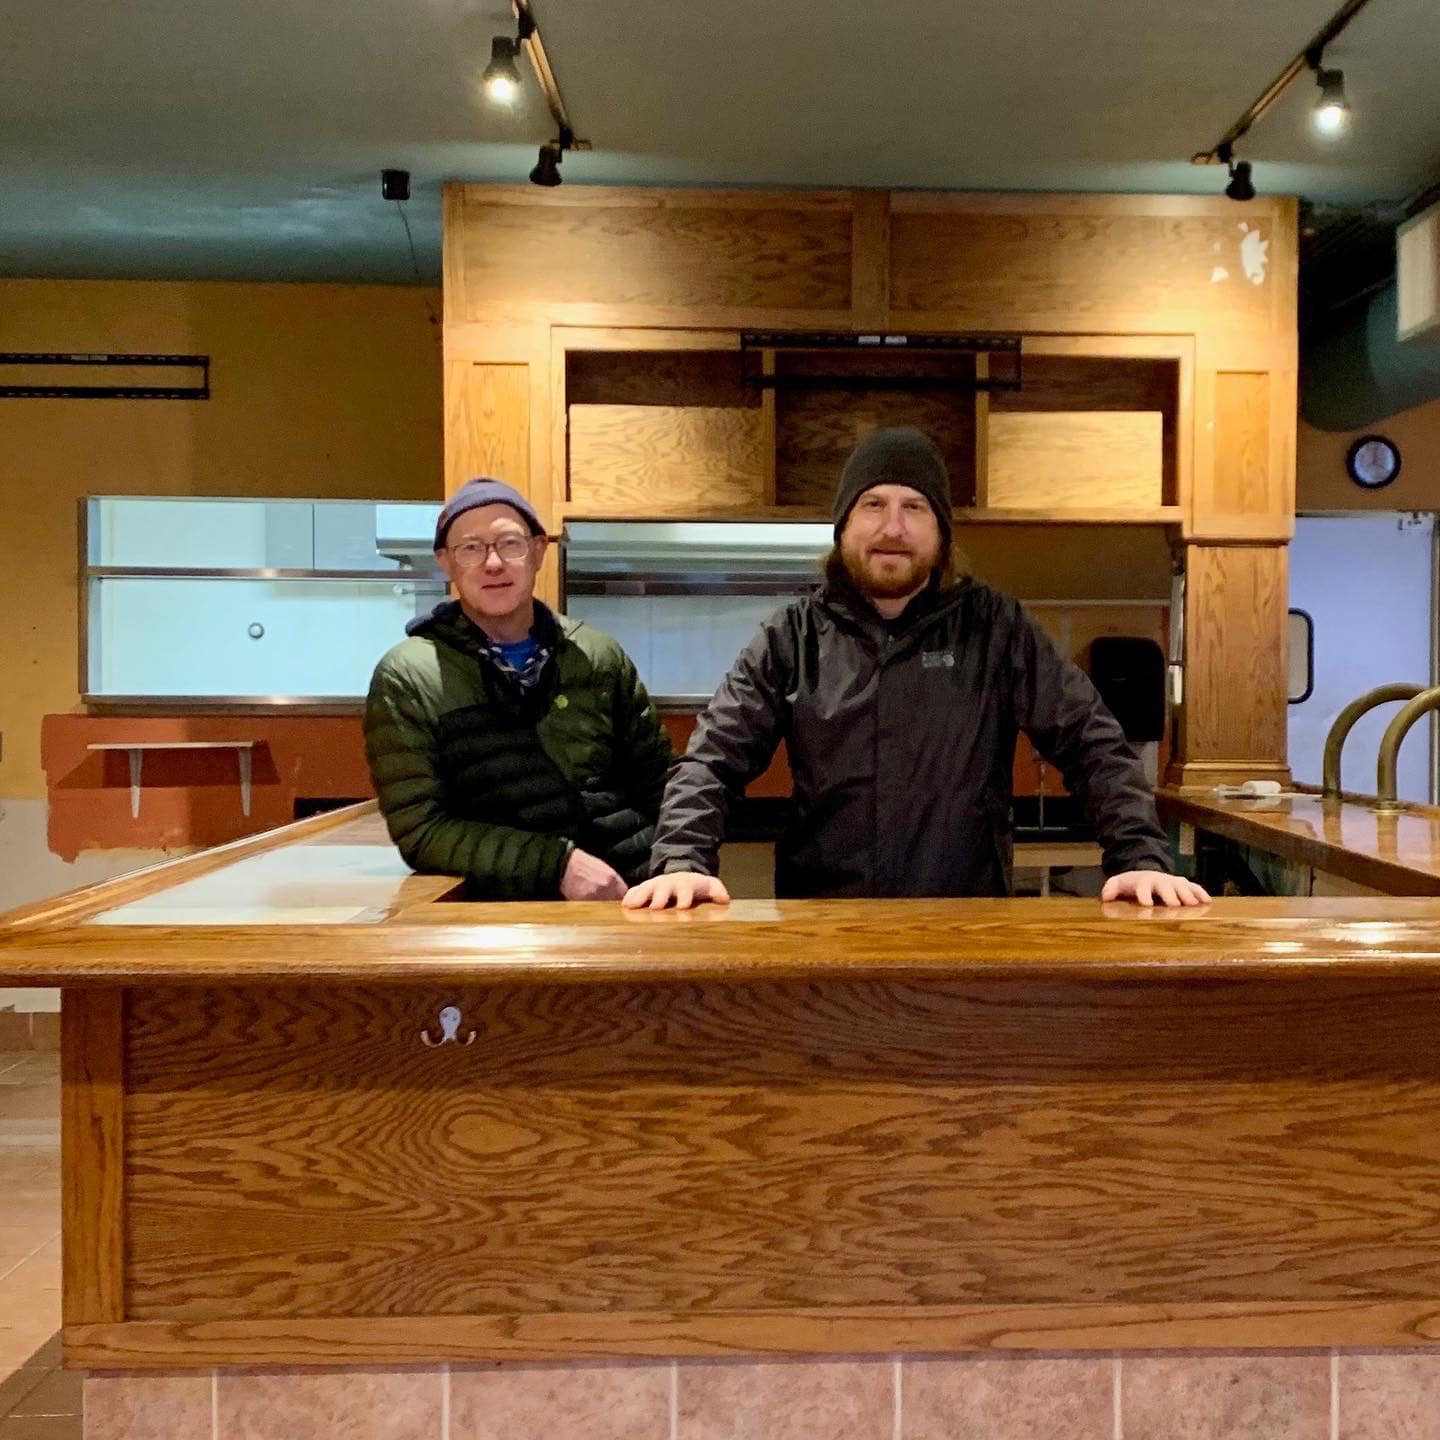 Gigantic Brewing co-founders Van Havig and Ben Love behind the bar of the forthcoming third location of Gigantic Brewing at at 4343 SE Hawthorne Blvd in Portland, Oregon. (image courtesy of Gigantic Brewing)